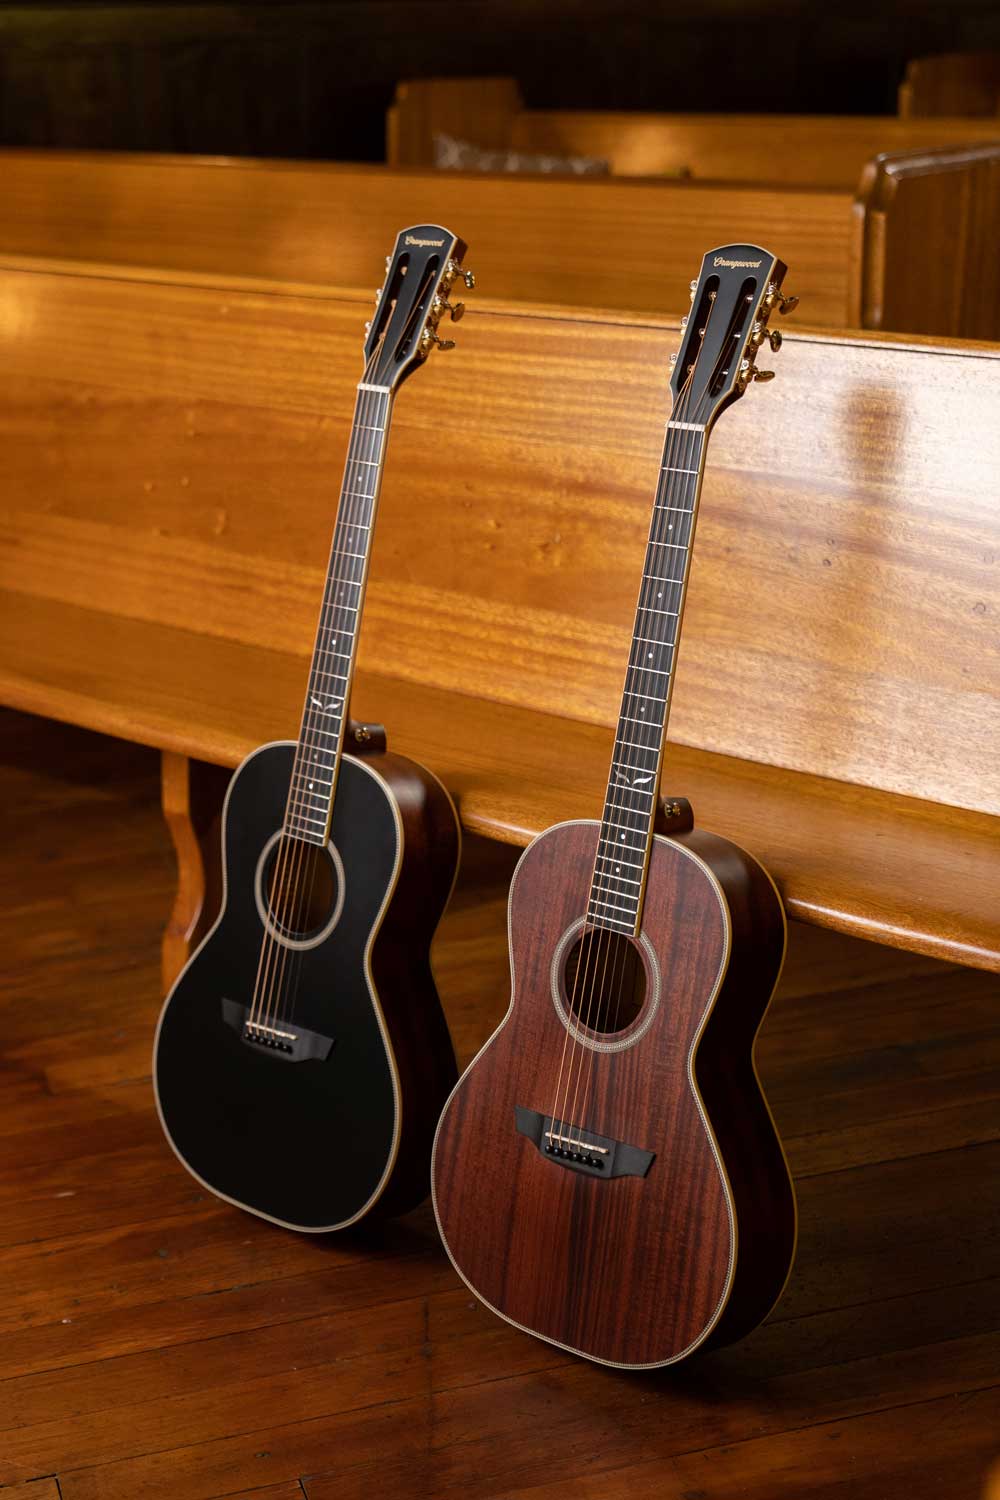 Two parlor guitars with slotted headstocks: one mahogany and one black